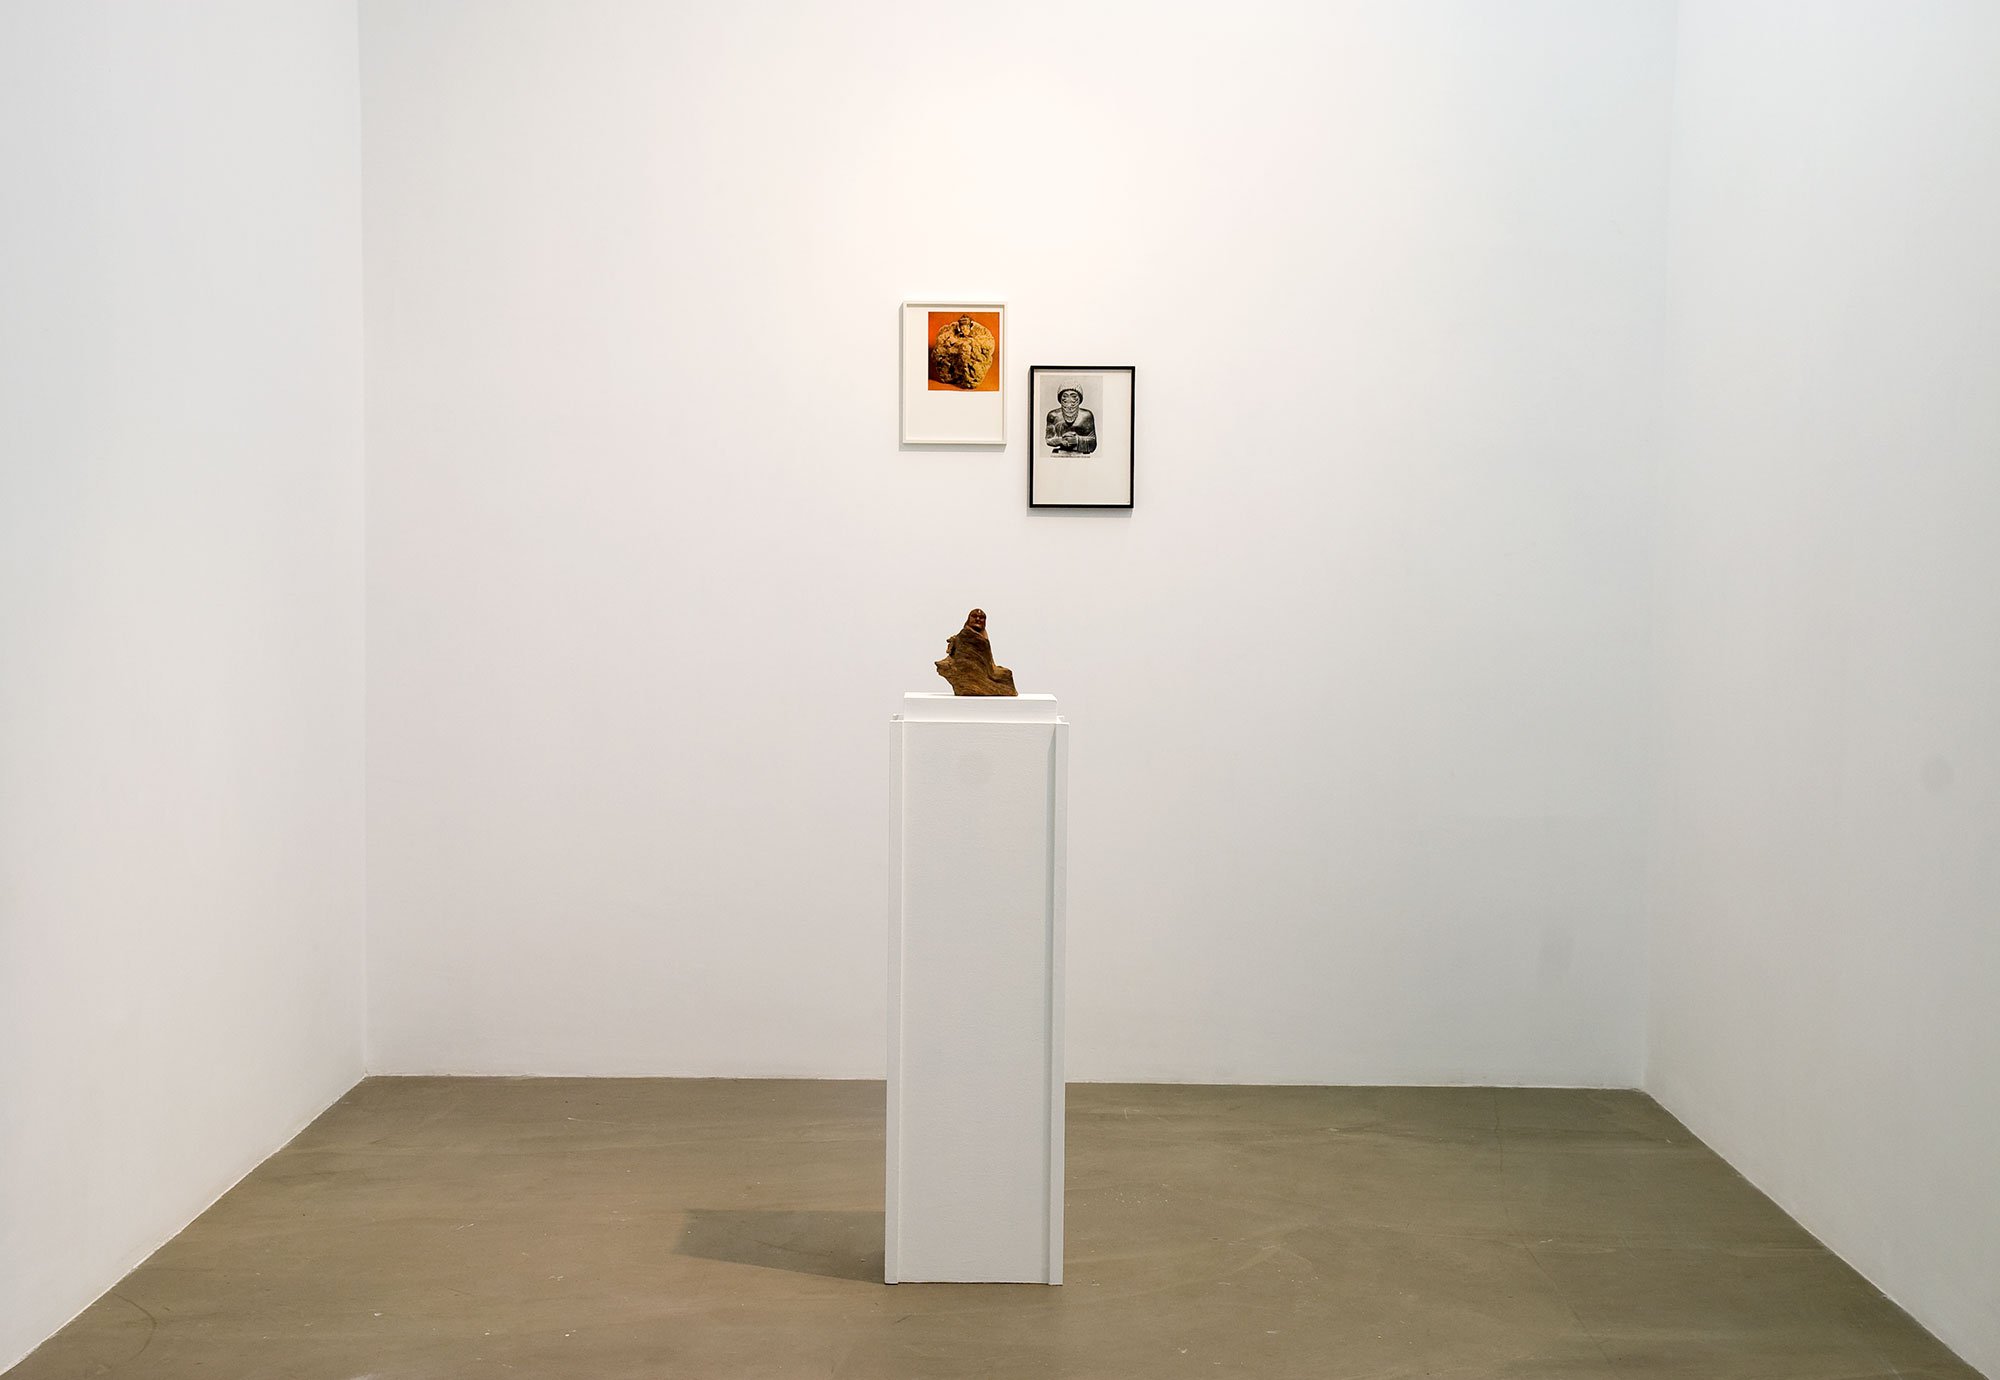 Haris Epaminonda, Untitled #02 l/g, two framed found images, plinth, wooden carved bonze figure, dimensions variable, 2009. Installation view, VOL. IV, Rodeo, Istanbul, 2009